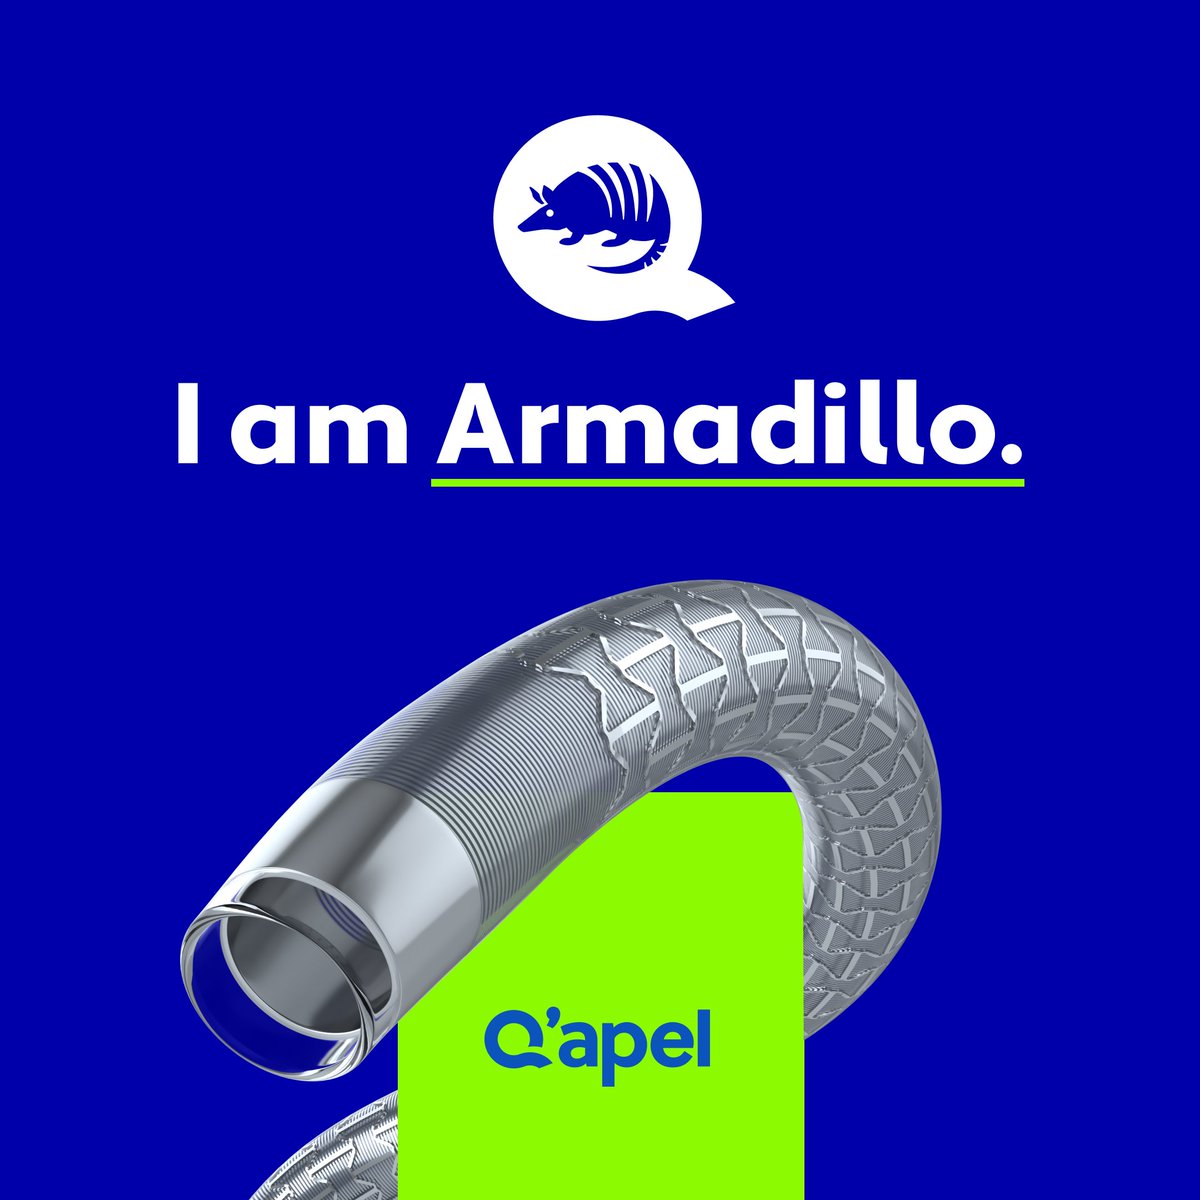 No matter the access approach, I’m simply leading the way. My slick construction enables biaxial access to accelerate delicate interventions and eliminate complexity and cost of conventional tri-axial configurations. #IamArmadillo #QapelMedical